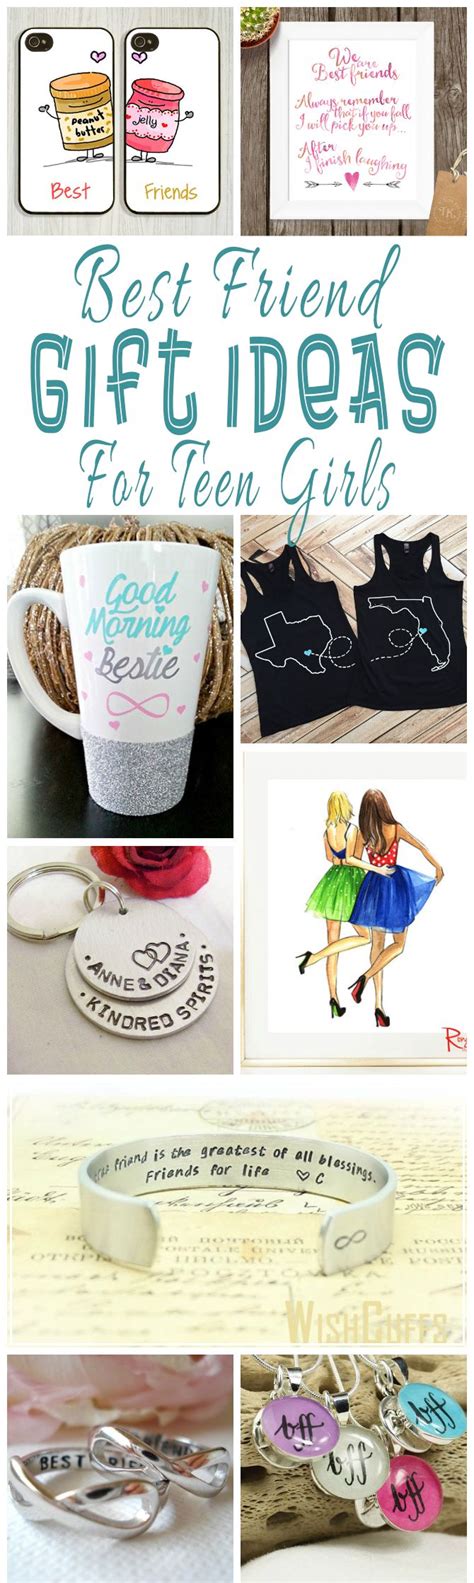 Gifts for best friends unique birthday gift by Best Friend Gift Ideas For Teens | Best friend gifts ...